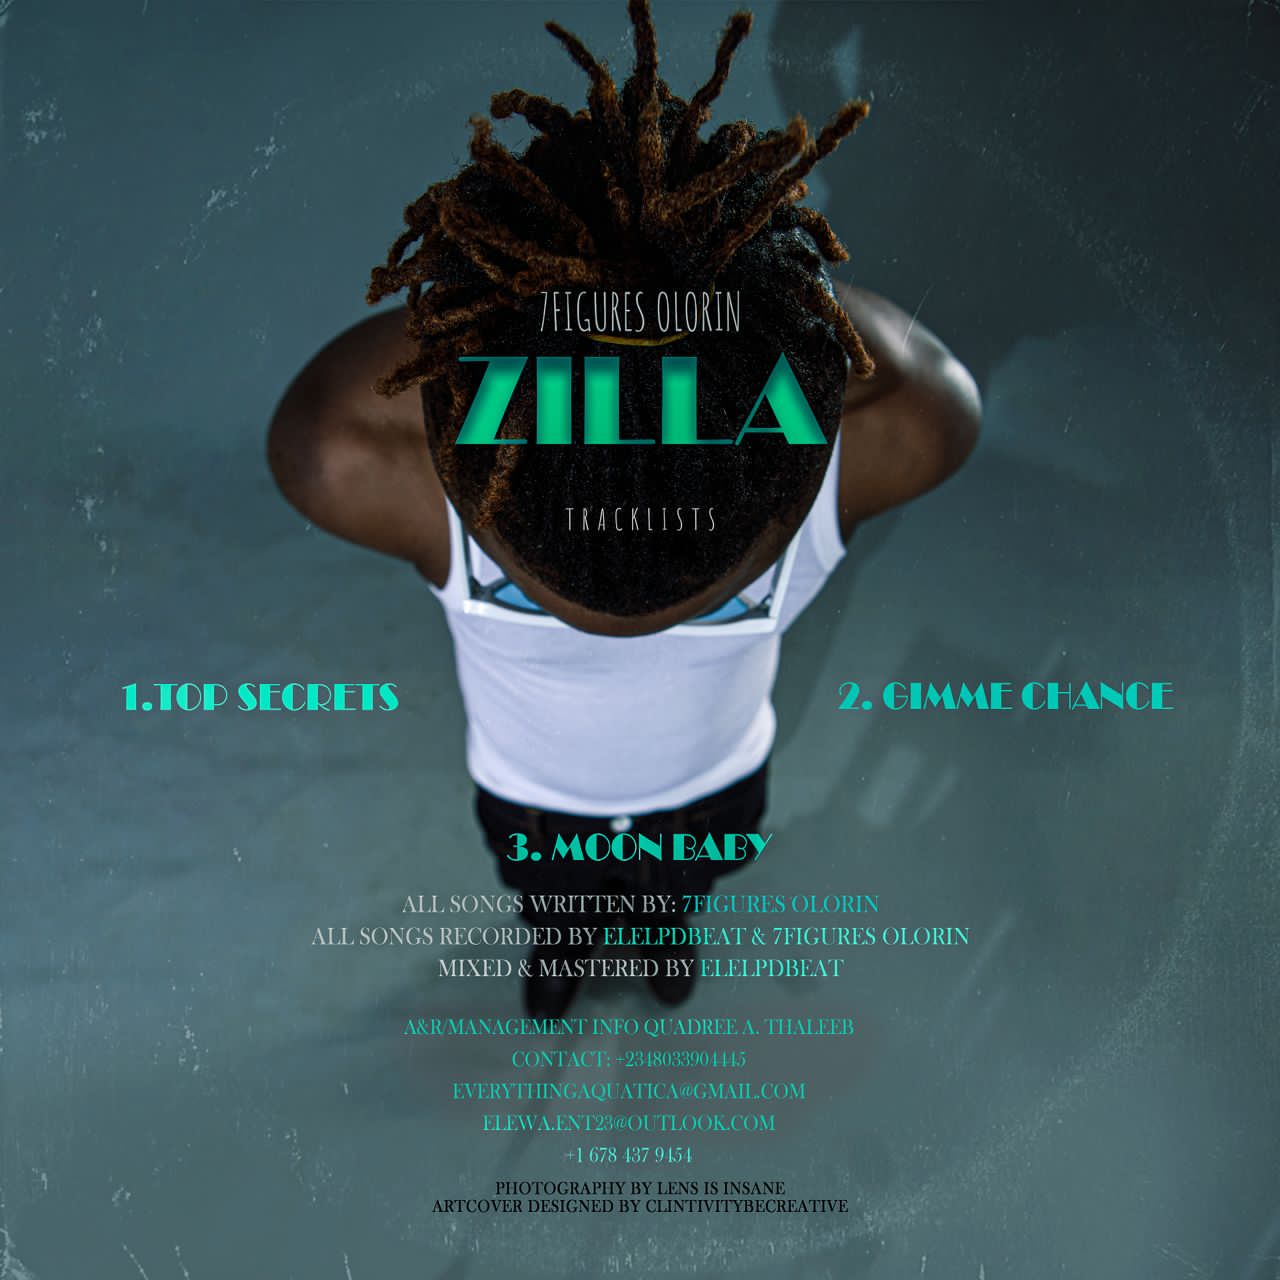 7Figures Olorin Set To Release A New Project Titled ZiLLA EP